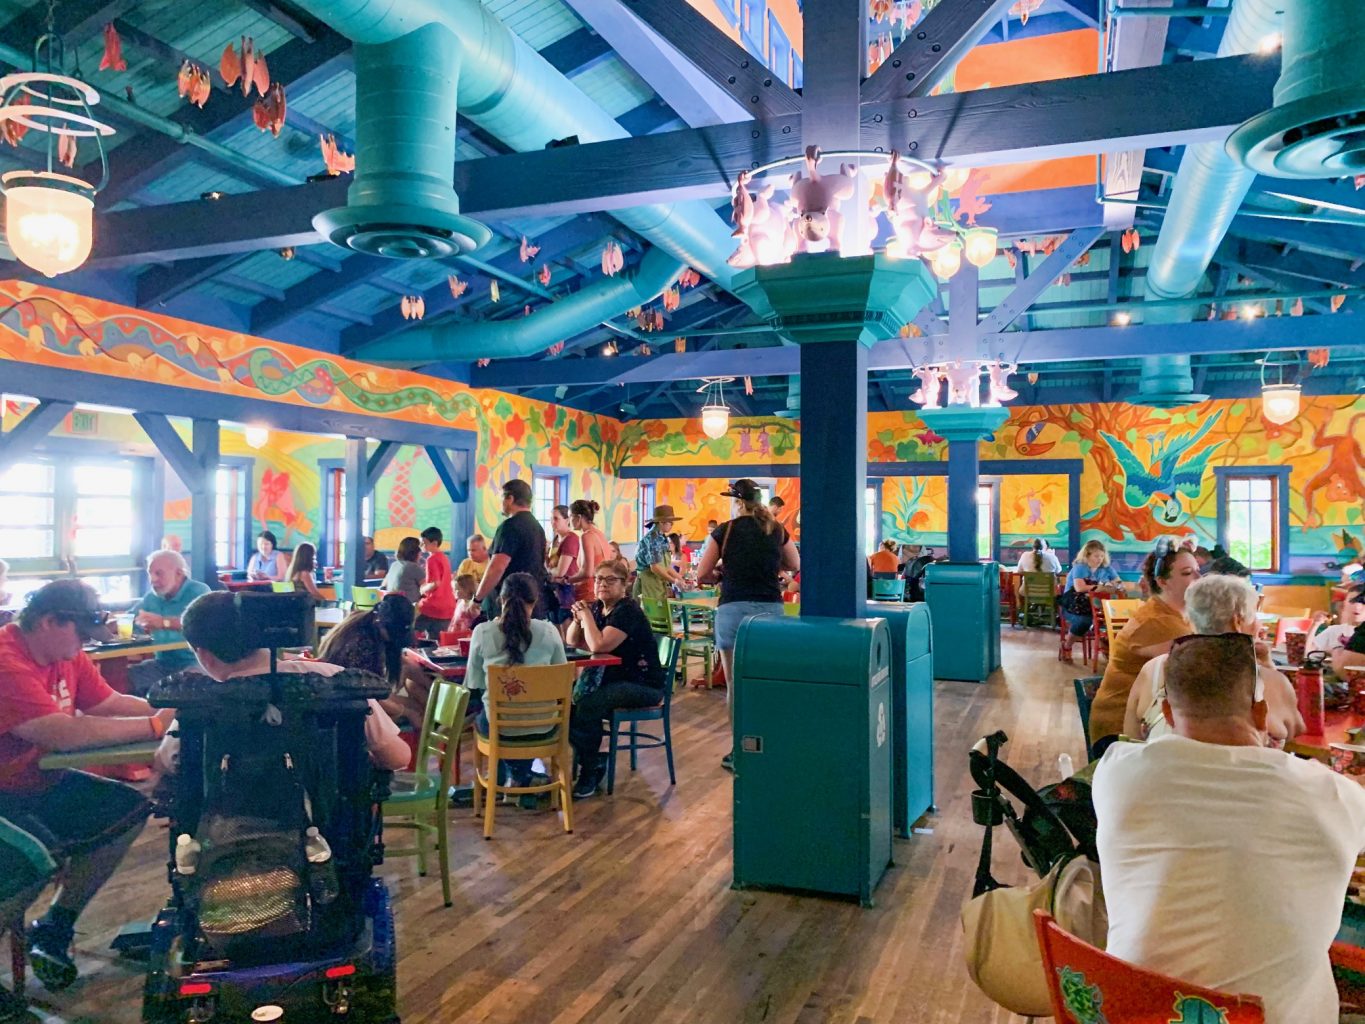 The brightly colored interior of Pizzafari screams family friendly with lots of blues and oranges, but it is not one of the best Animal Kingdom restaurants because it literally serves such bland foods. 